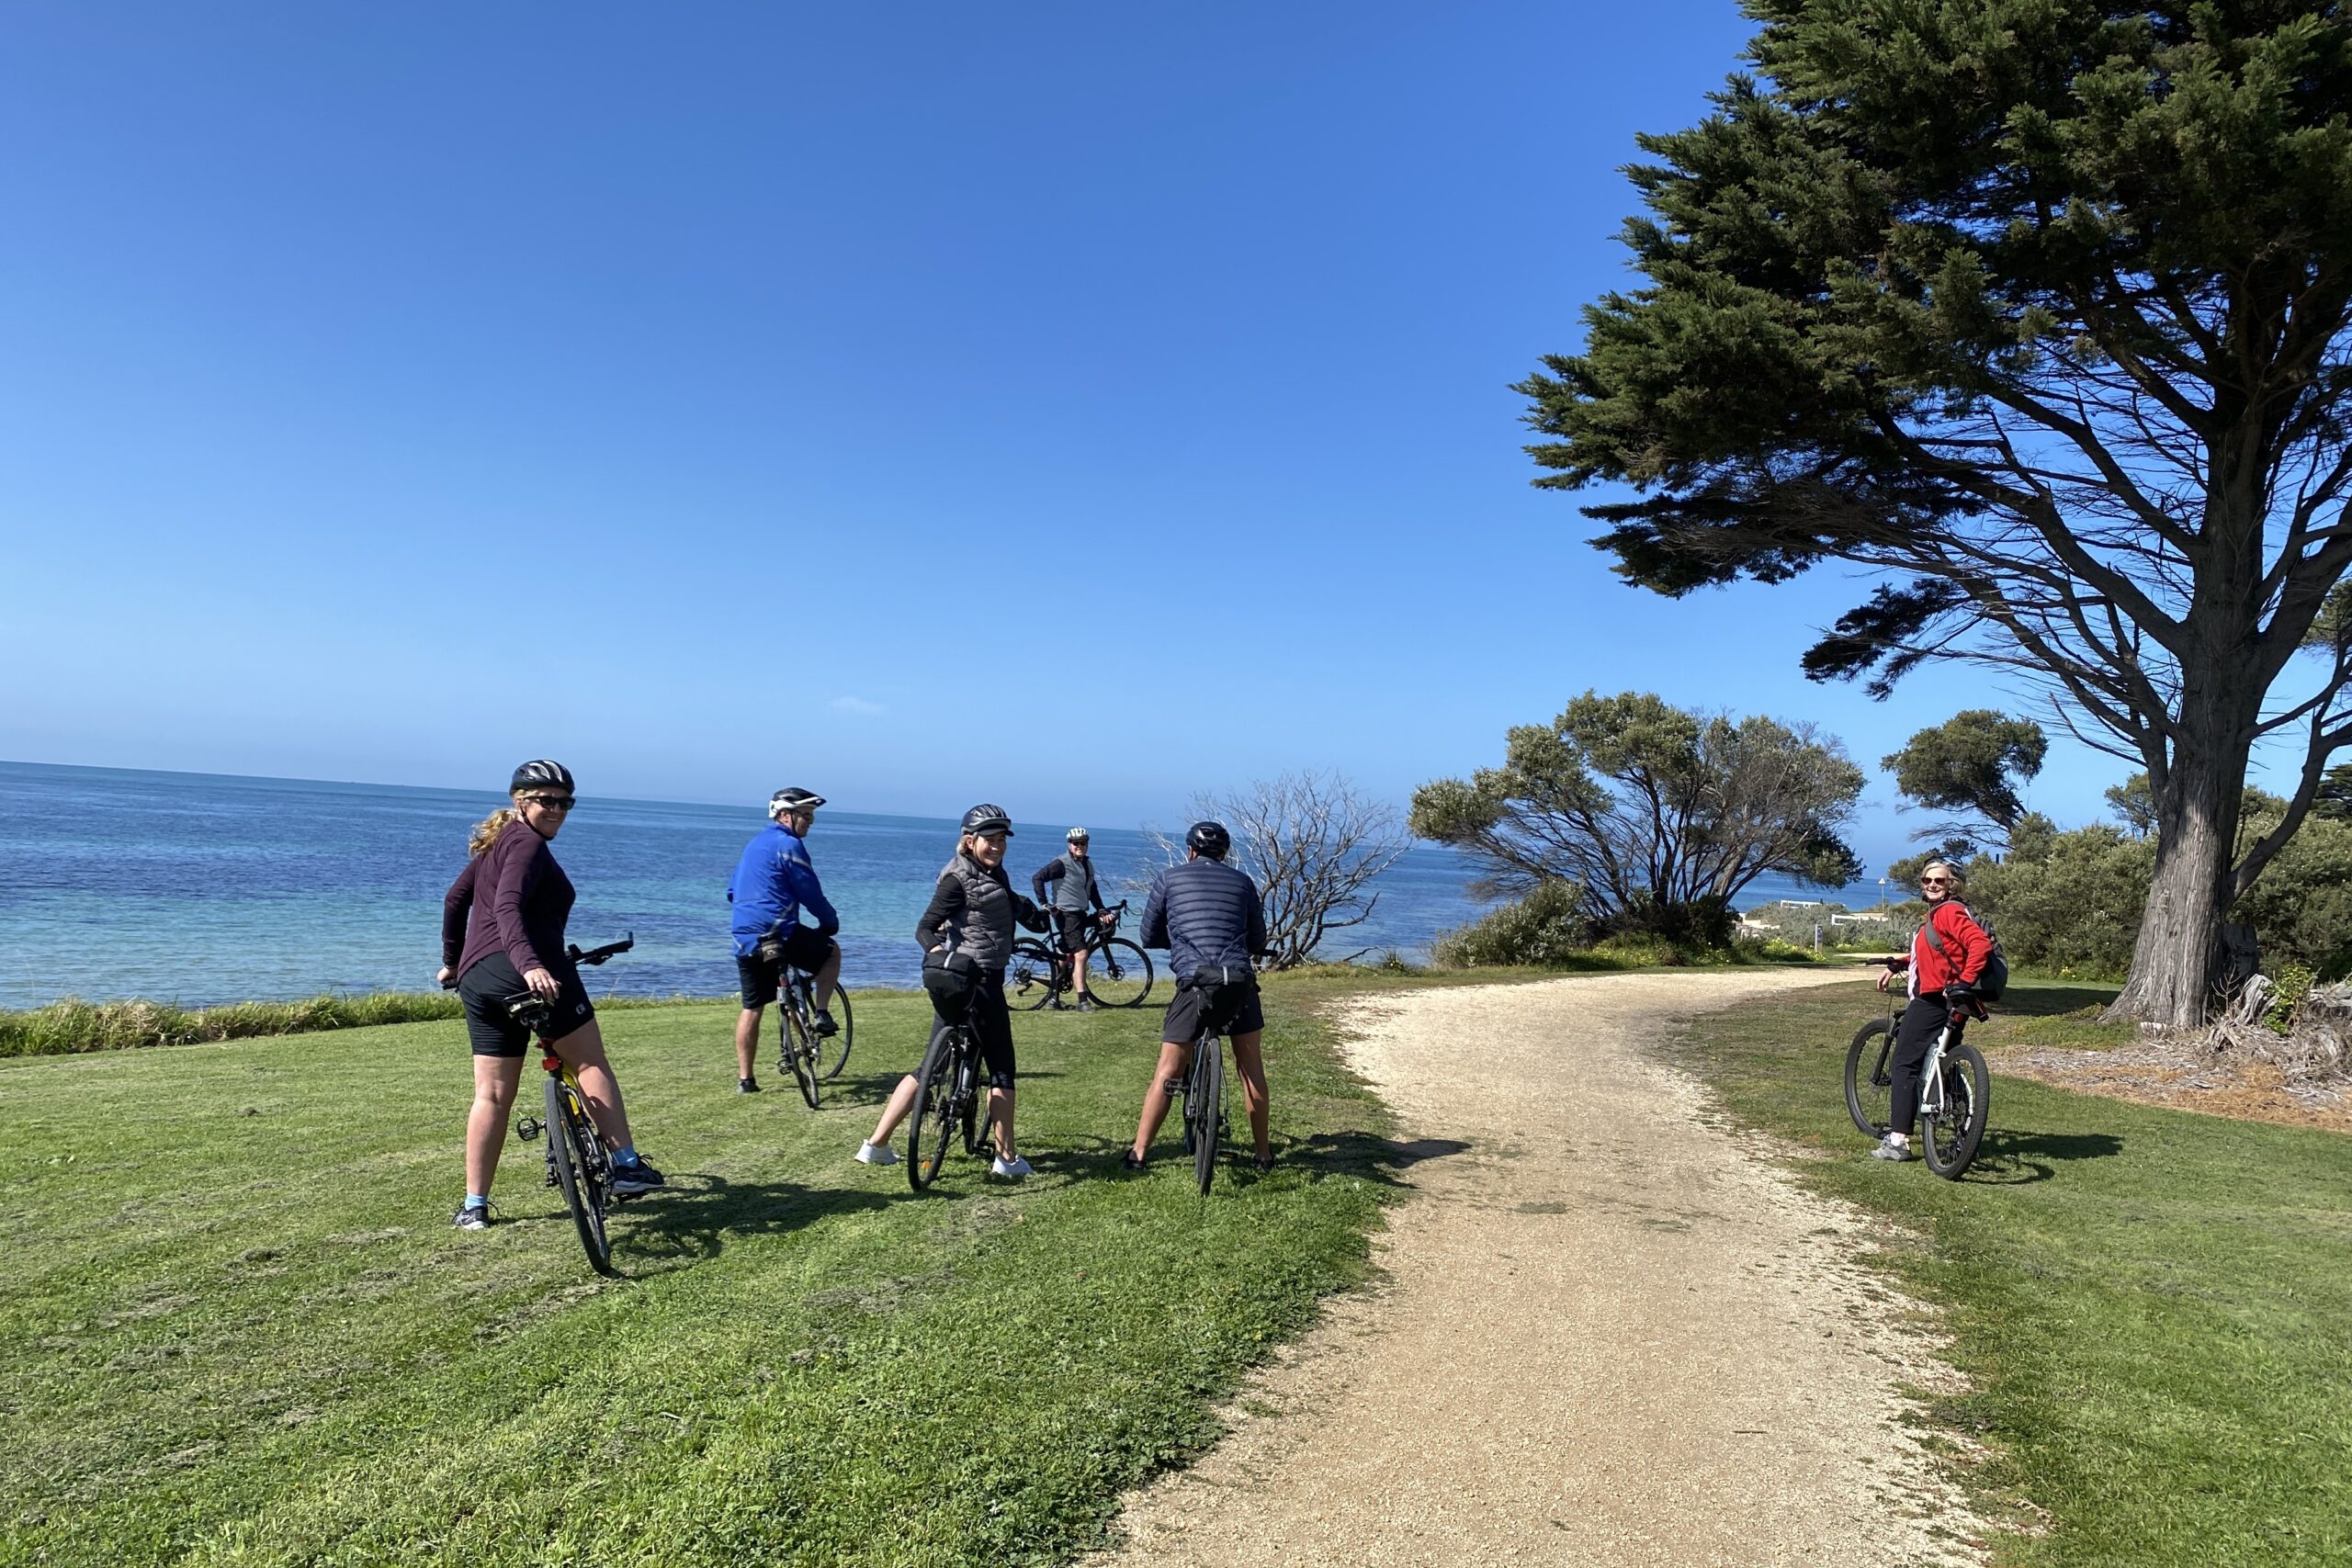 Portarlington & The Bellarine | Cycle, Sail & Stay | 2 day Supported Cycle Tour Package